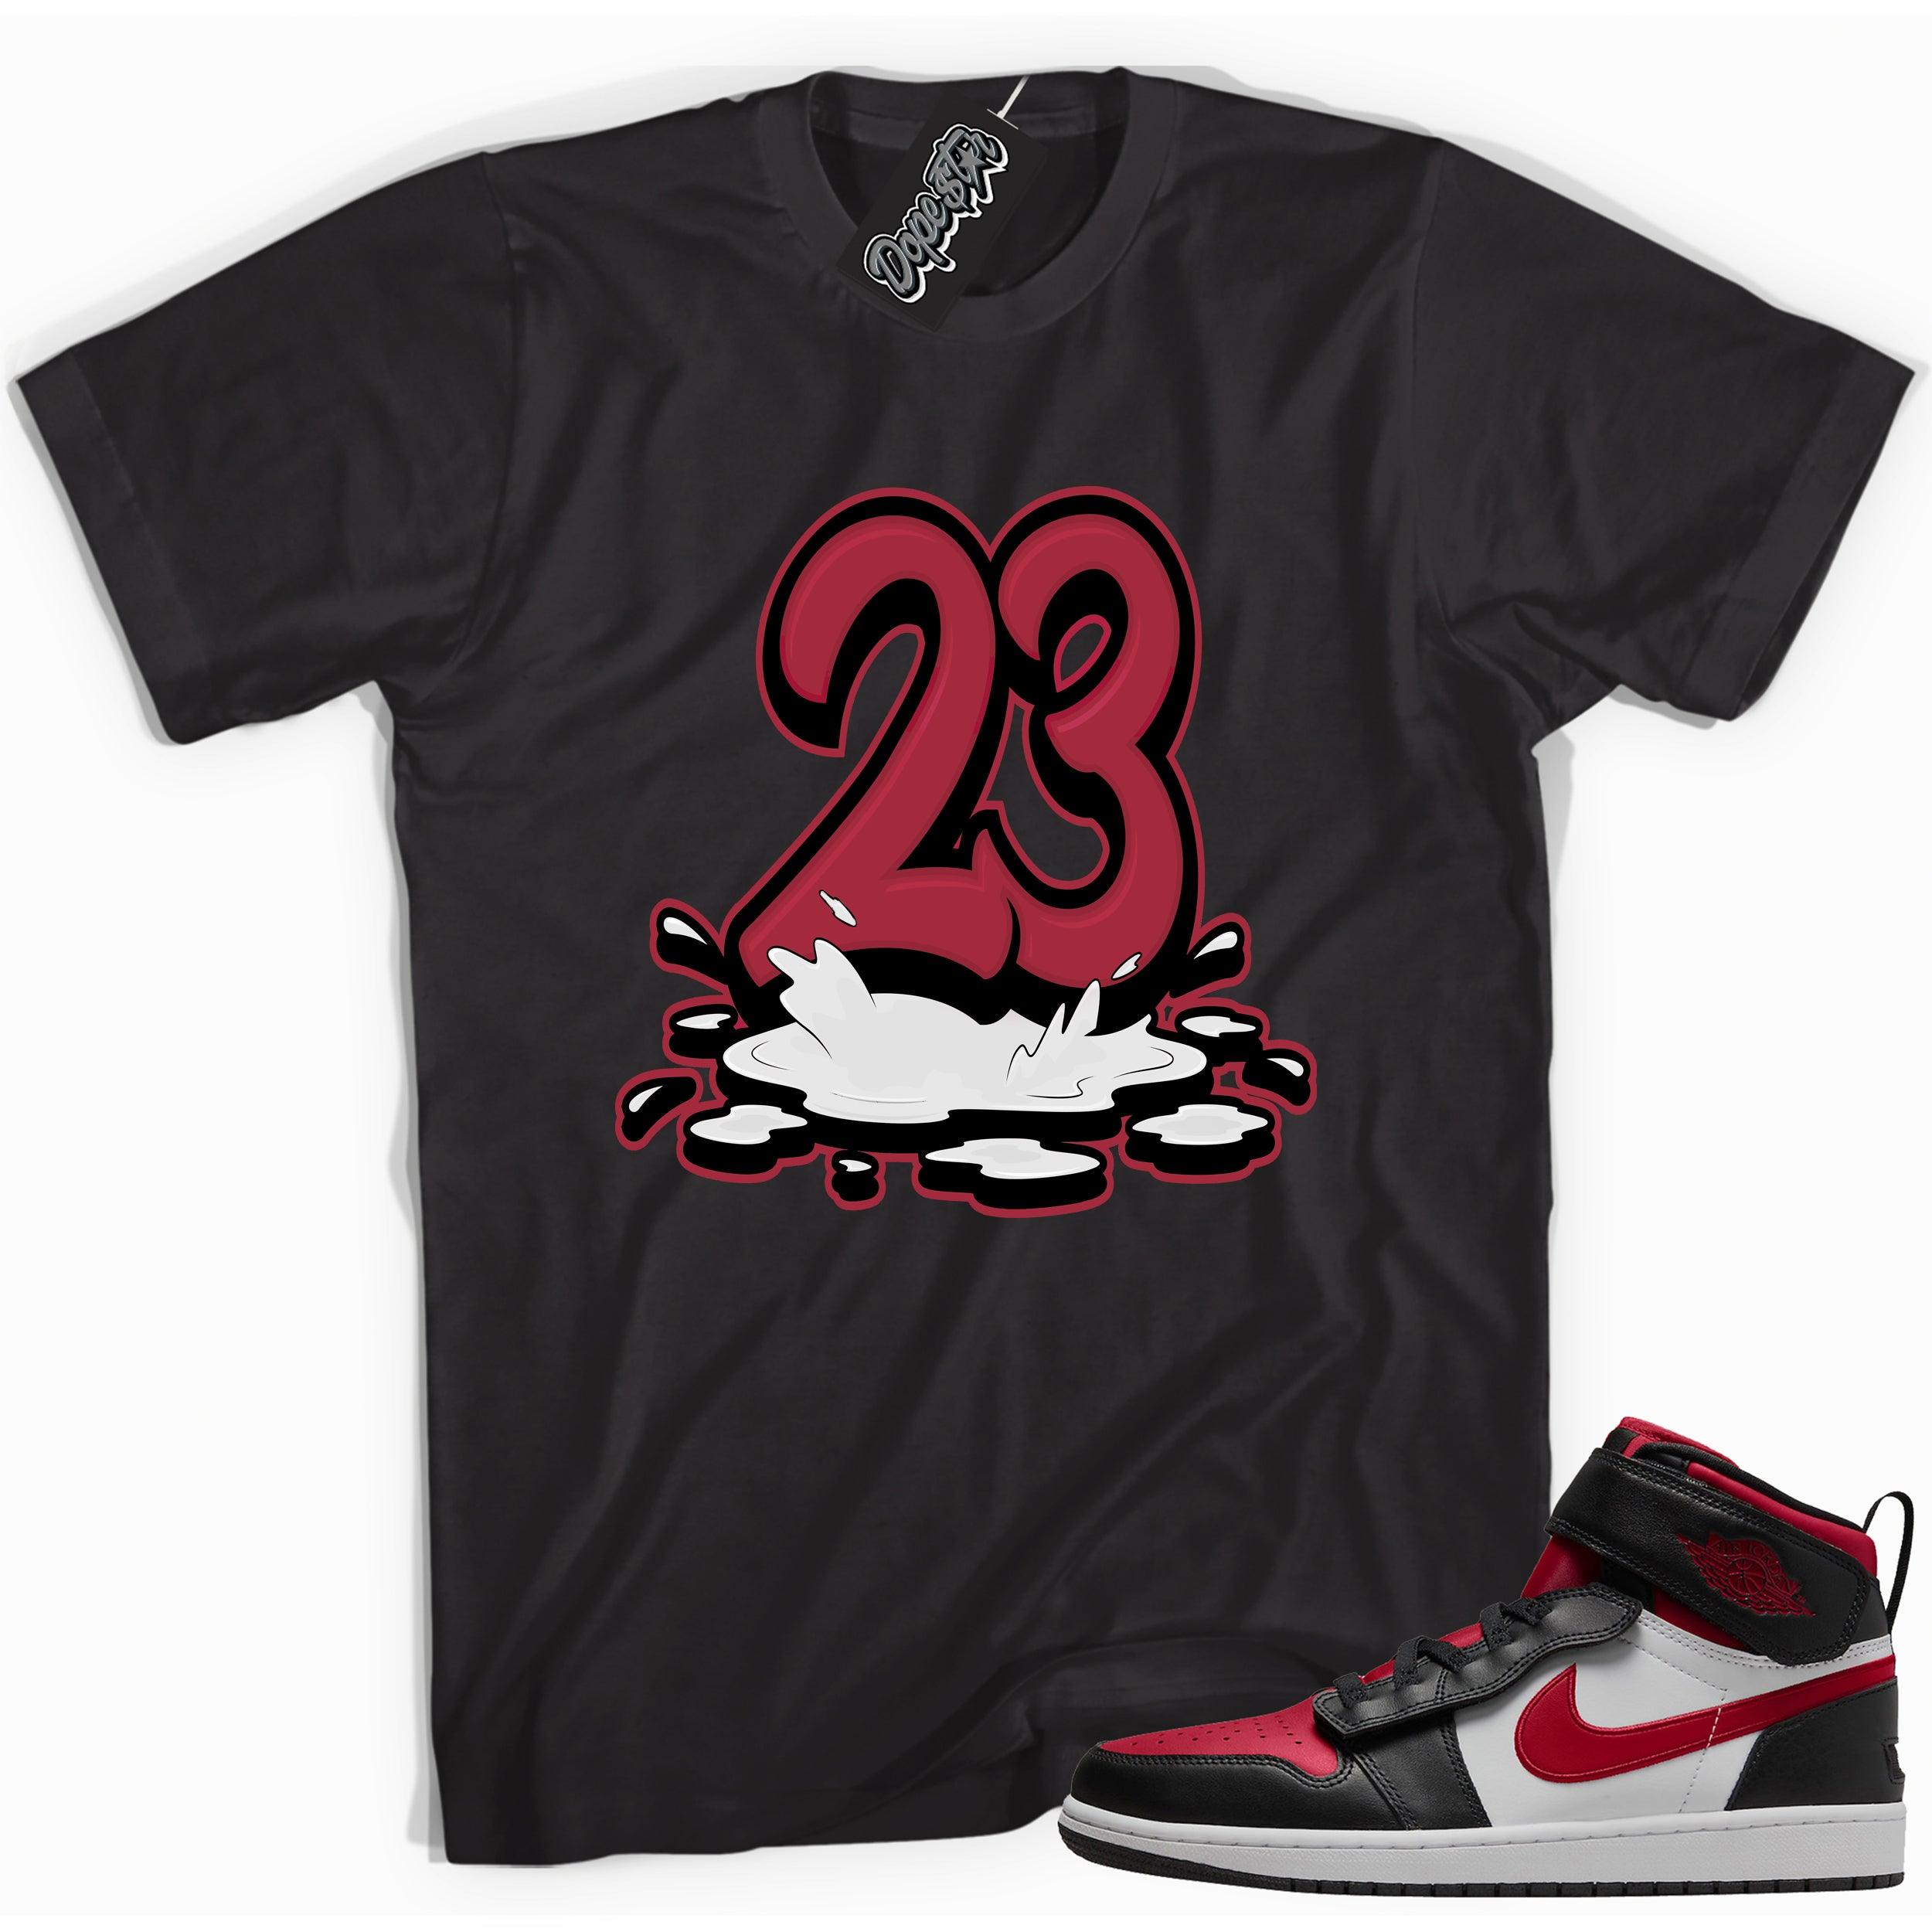 Number 23 Melting Shirt AJ 1 High FlyEase Black White Fire Red photo